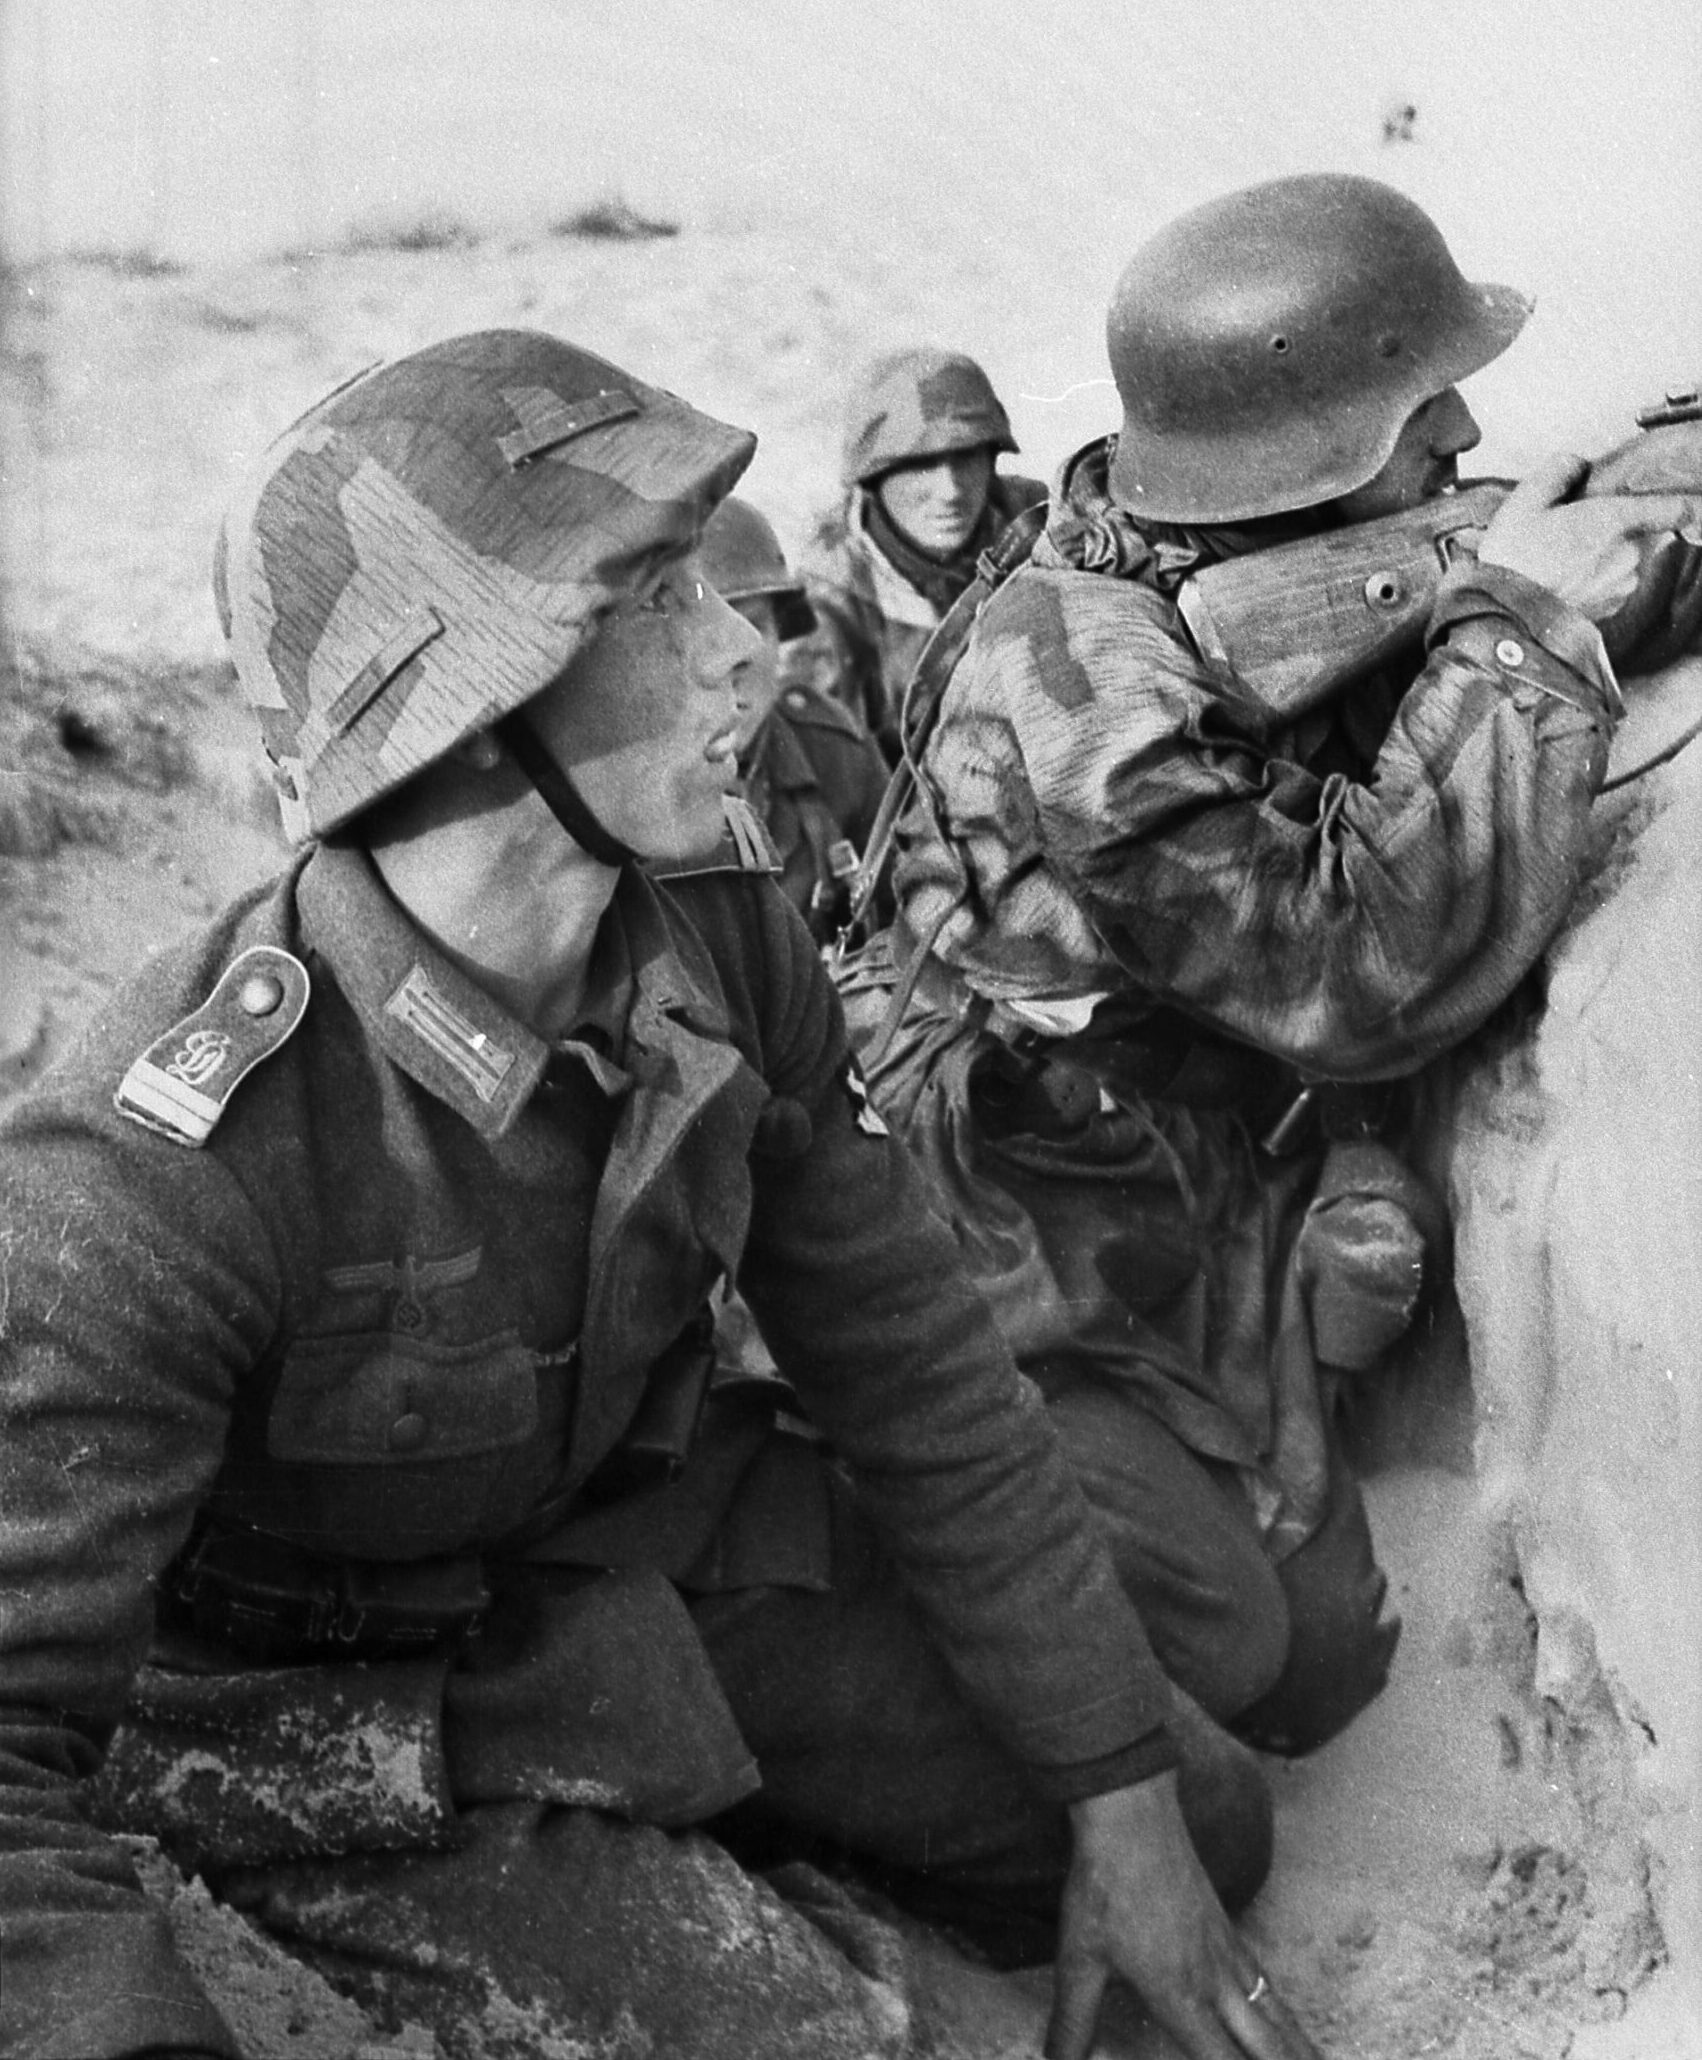 SS soldiers of the German Infantry Regiment Grossdeutschland peer apprehensively over the top of a ditch that provides some cover against enemy fire. These troops were assigned to Army Group Center in the  summer of 1941. During those long days, the Red Army won its first major victory of the “Great Patriotic War” around Yelnya.